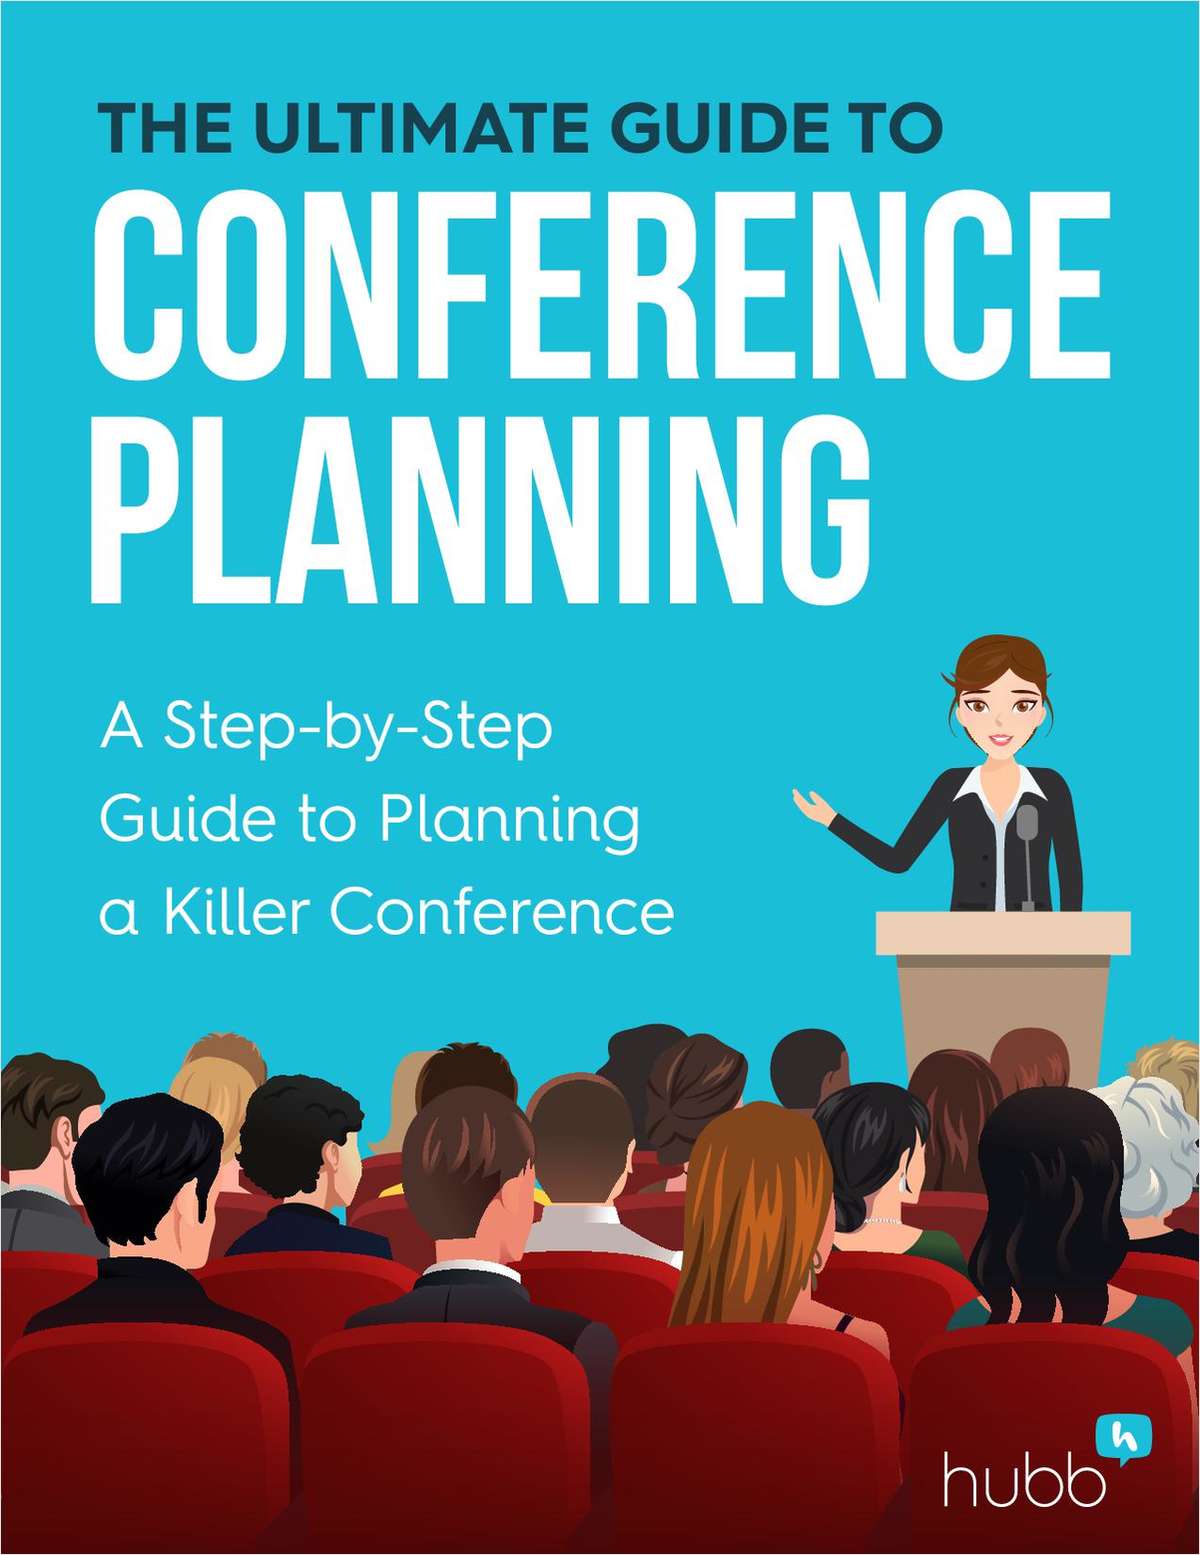 The Ultimate Guide to Conference Planning